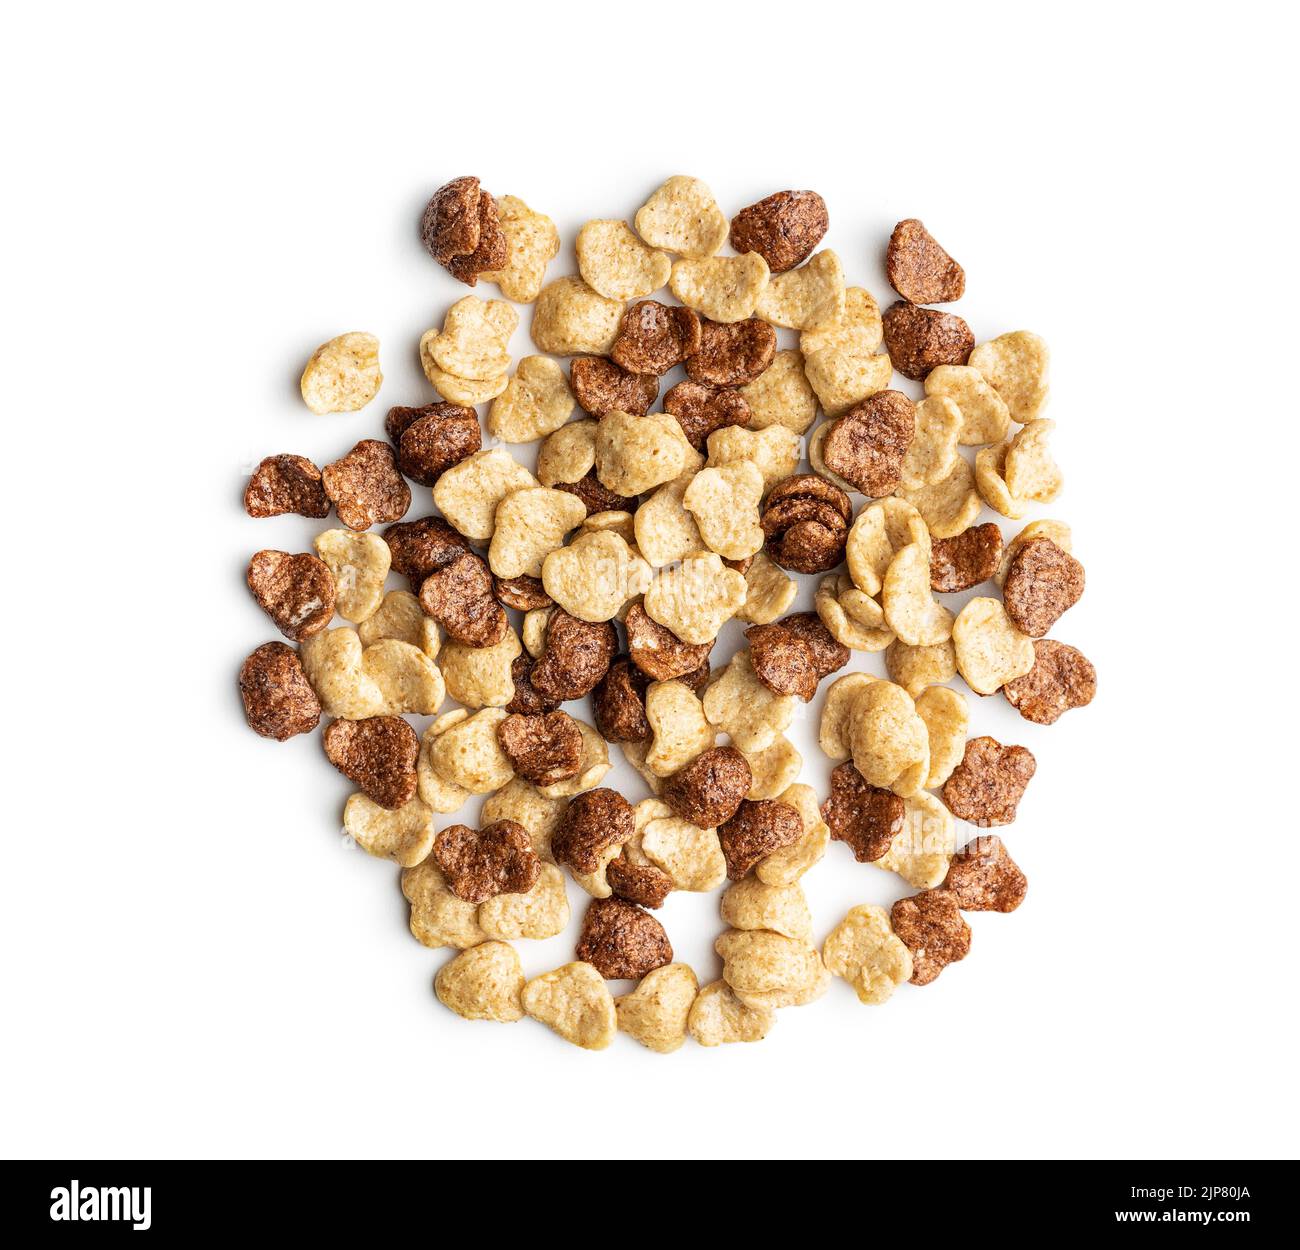 Breakfast cereal flakes isolated on a white background. Stock Photo